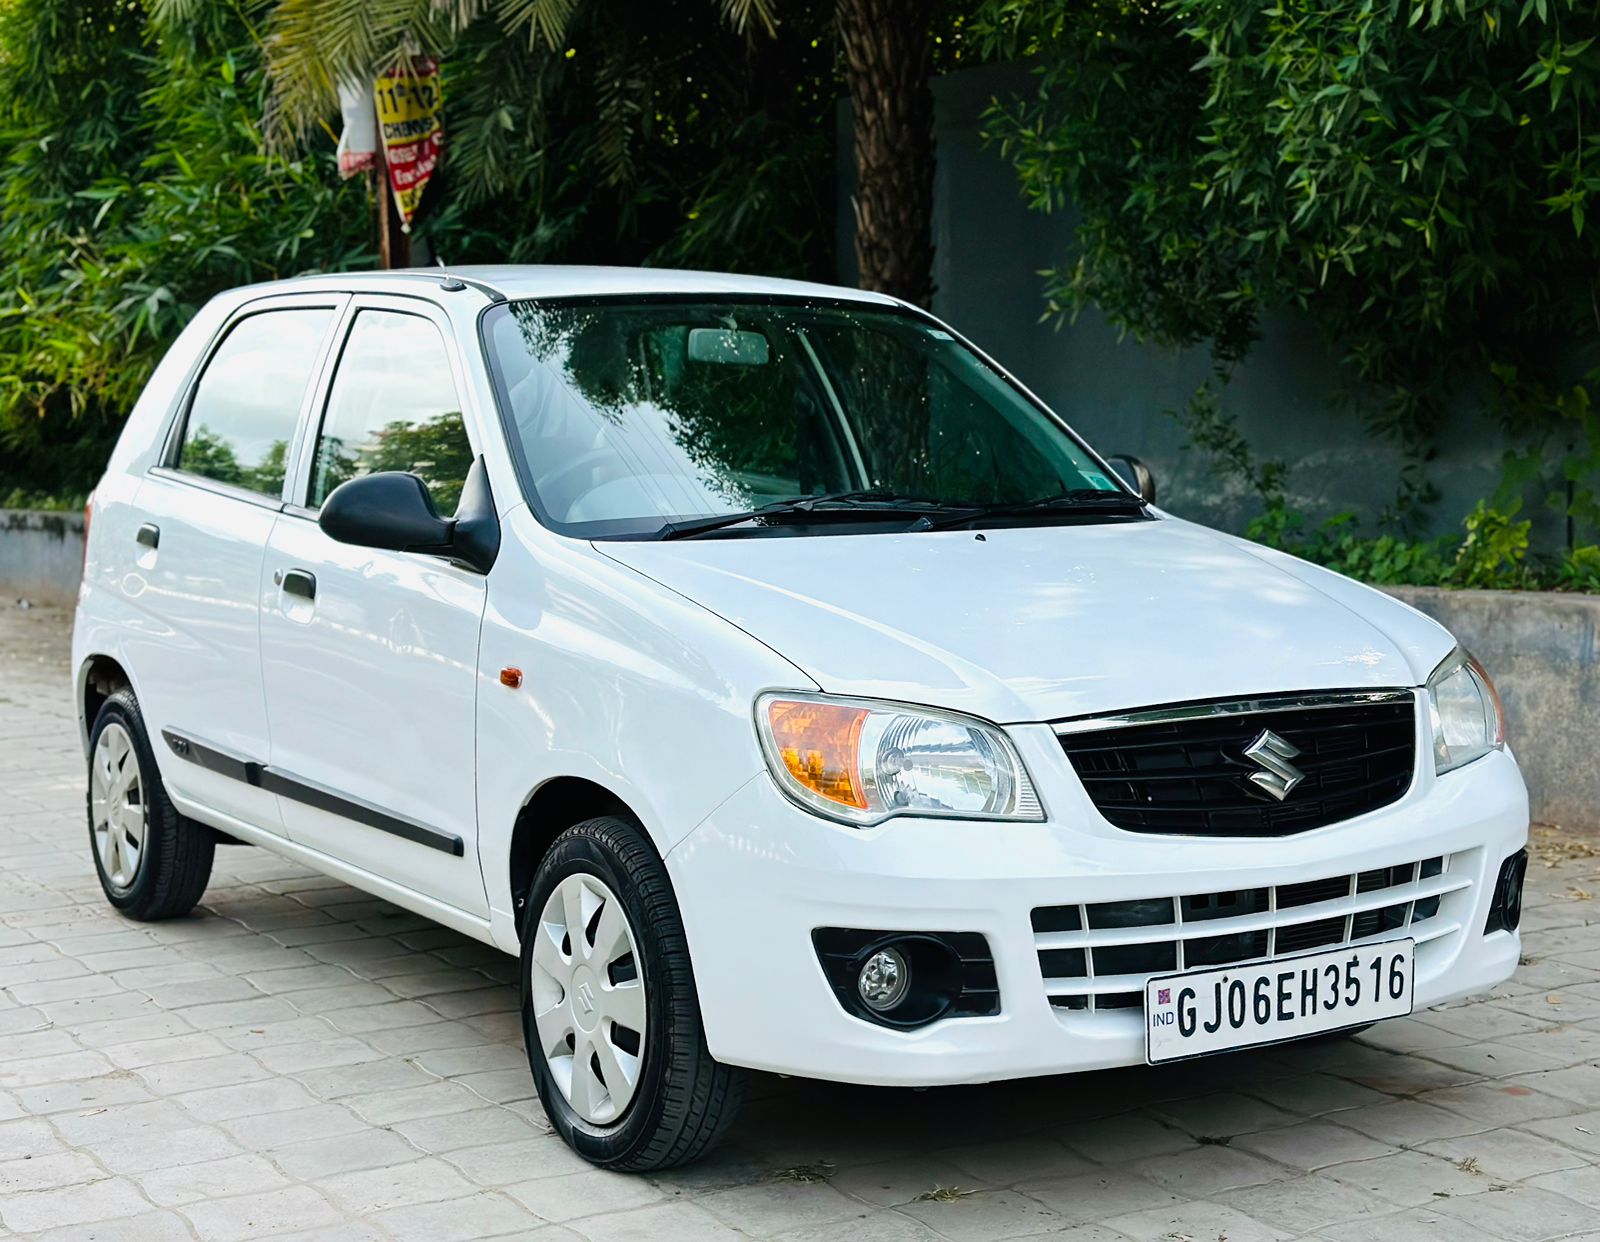 Details View - Alto K10 photos - reseller,reseller marketplace,advetising your products,reseller bazzar,resellerbazzar.in,india's classified site,ALTO K10 , usedALTO K10 , old ALTO K10 , old ALTO K10 in Vadodara , ALTO K10 in Vadodara